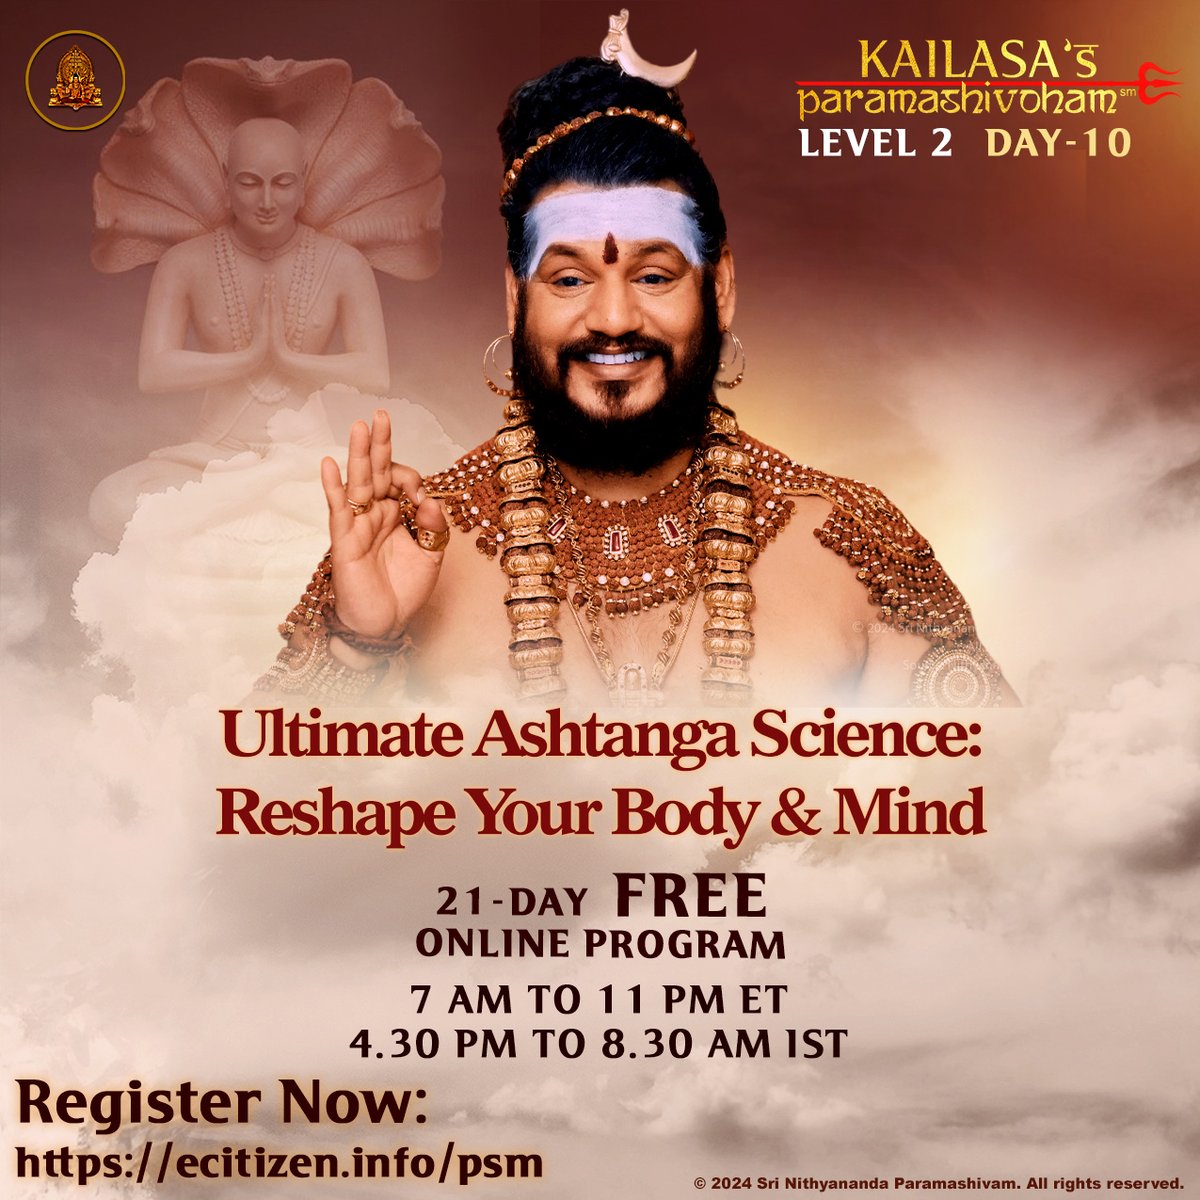 Unlock Ultimate Ashtanga Yoga Secrets: Transform Your Body and Mind

Experience the profound transformation of both body and mind with the ancient spiritual science of Ashtanga Yoga, as taught by Patanjali Maharishi. Paramashivoham Level-2 invites you to a life-changing journey…